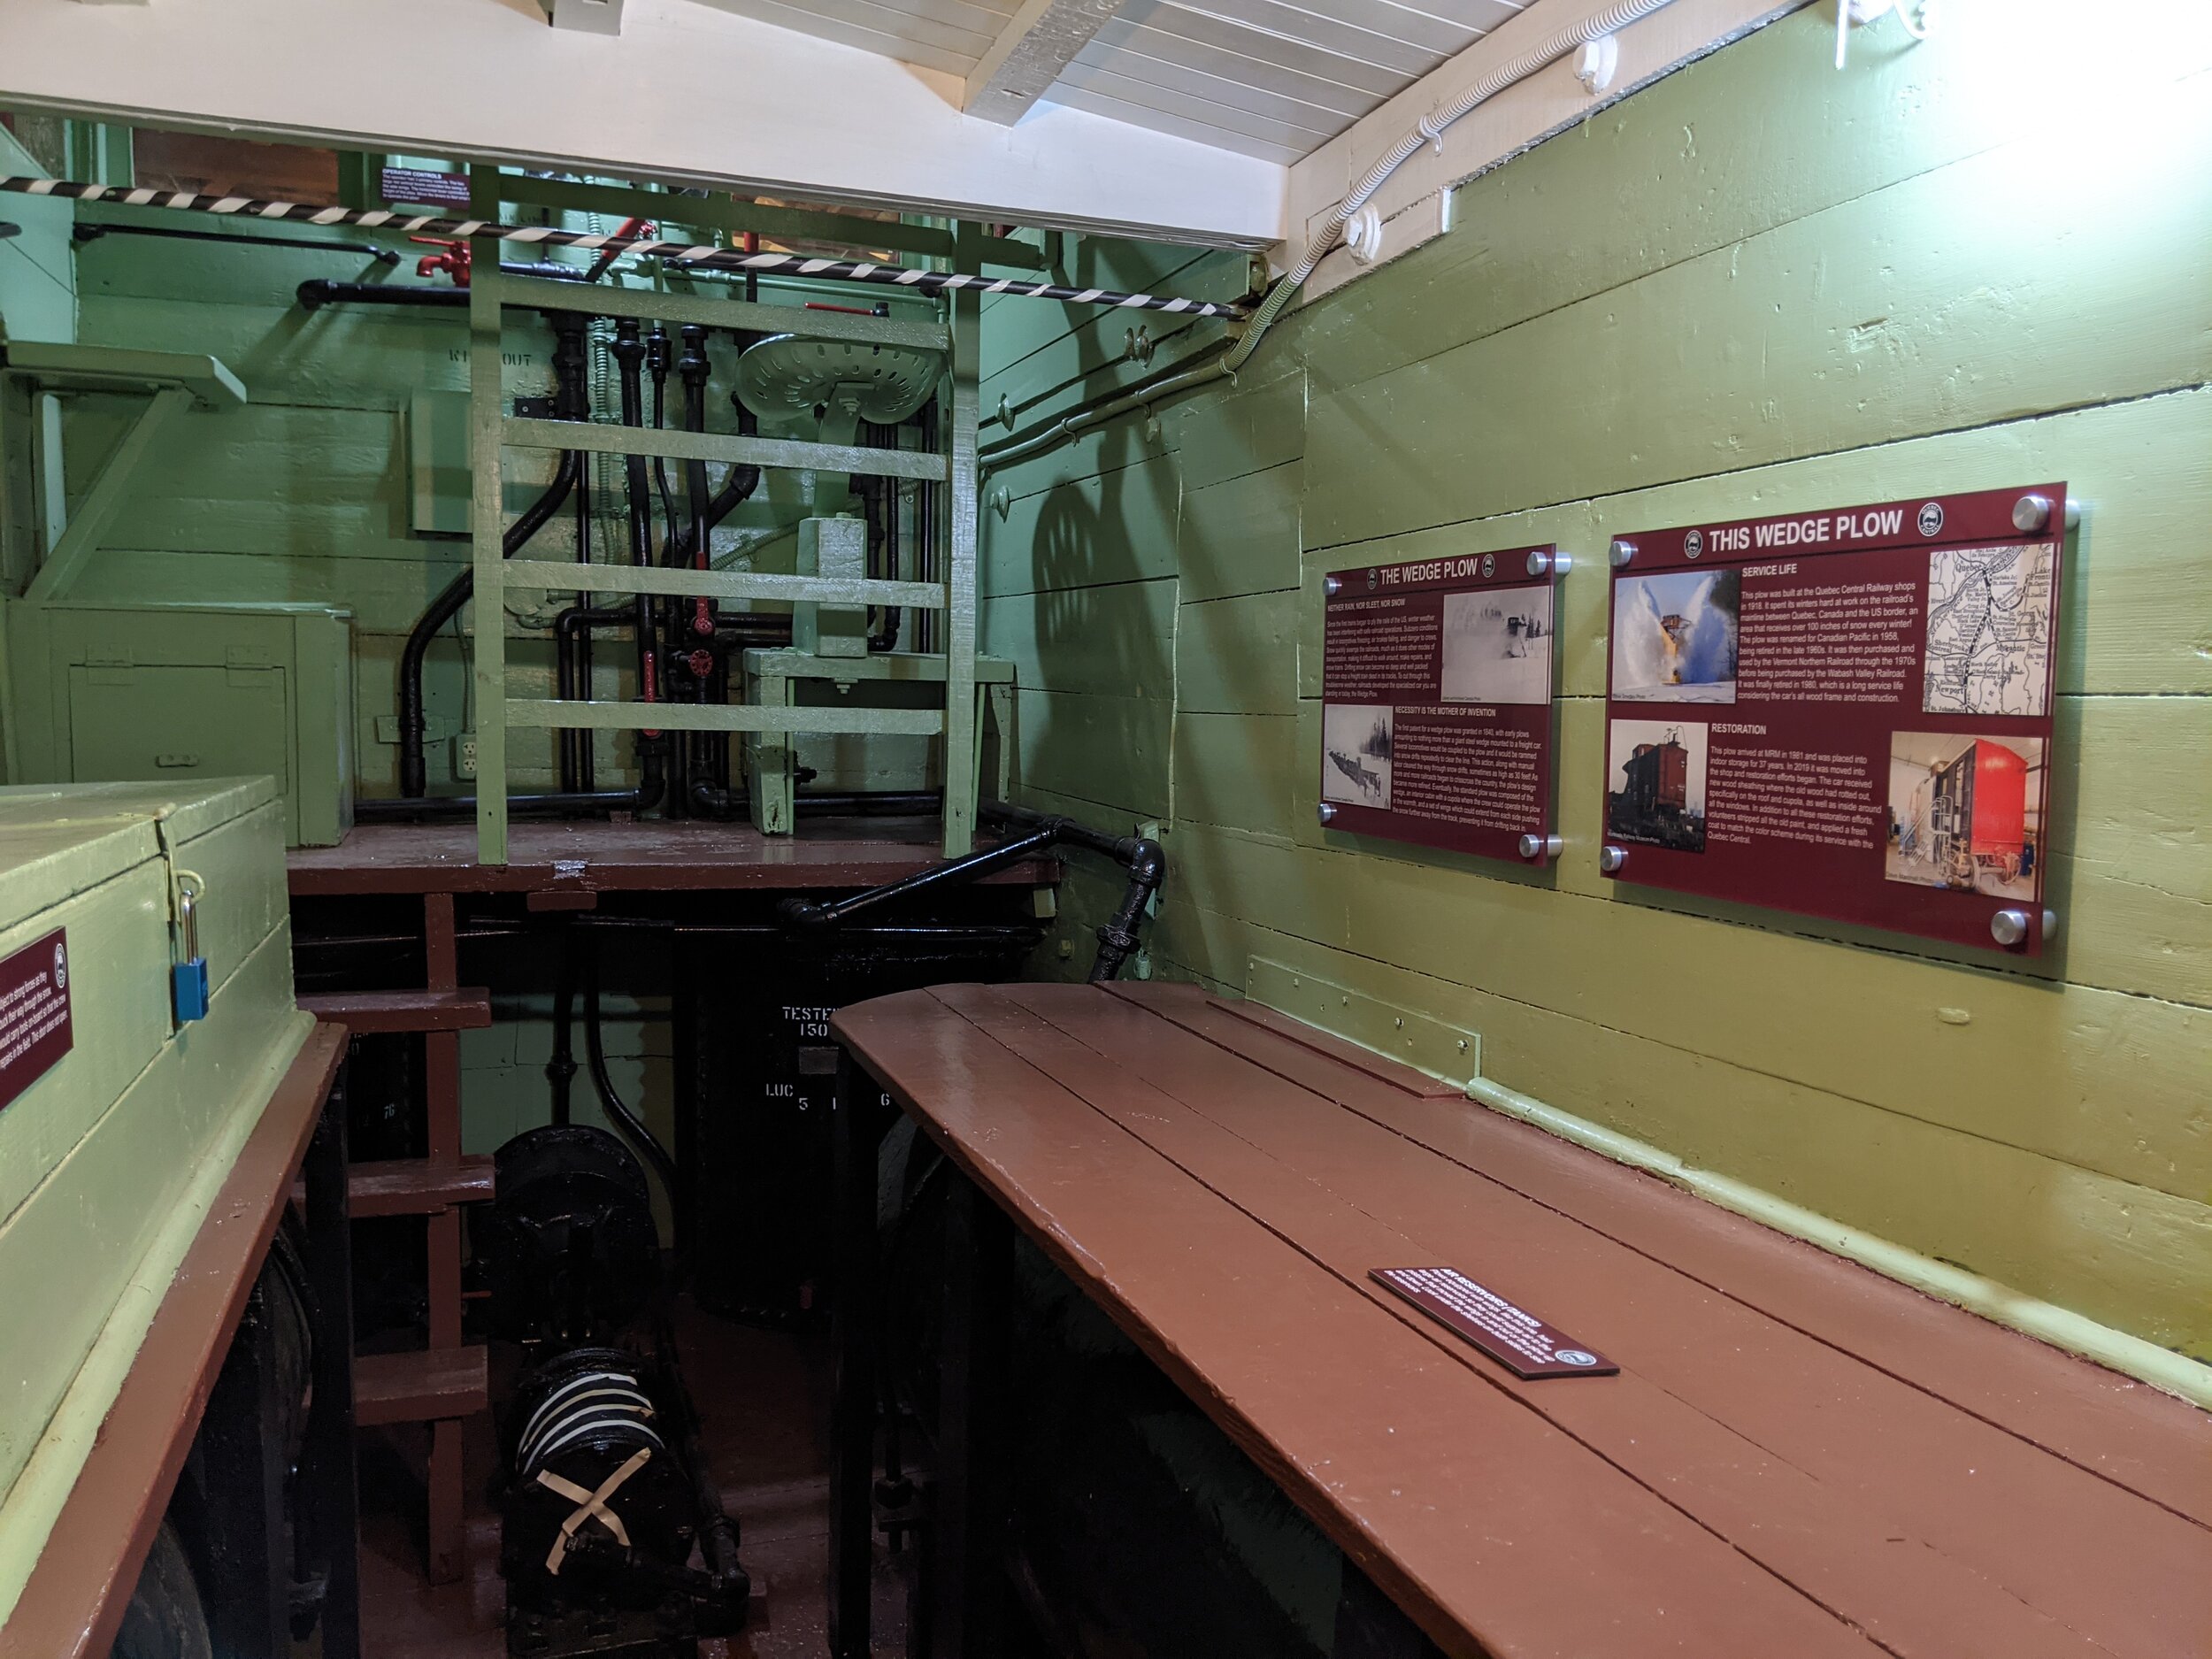  Volunteers also installed exhibits inside the CP snowplow.  